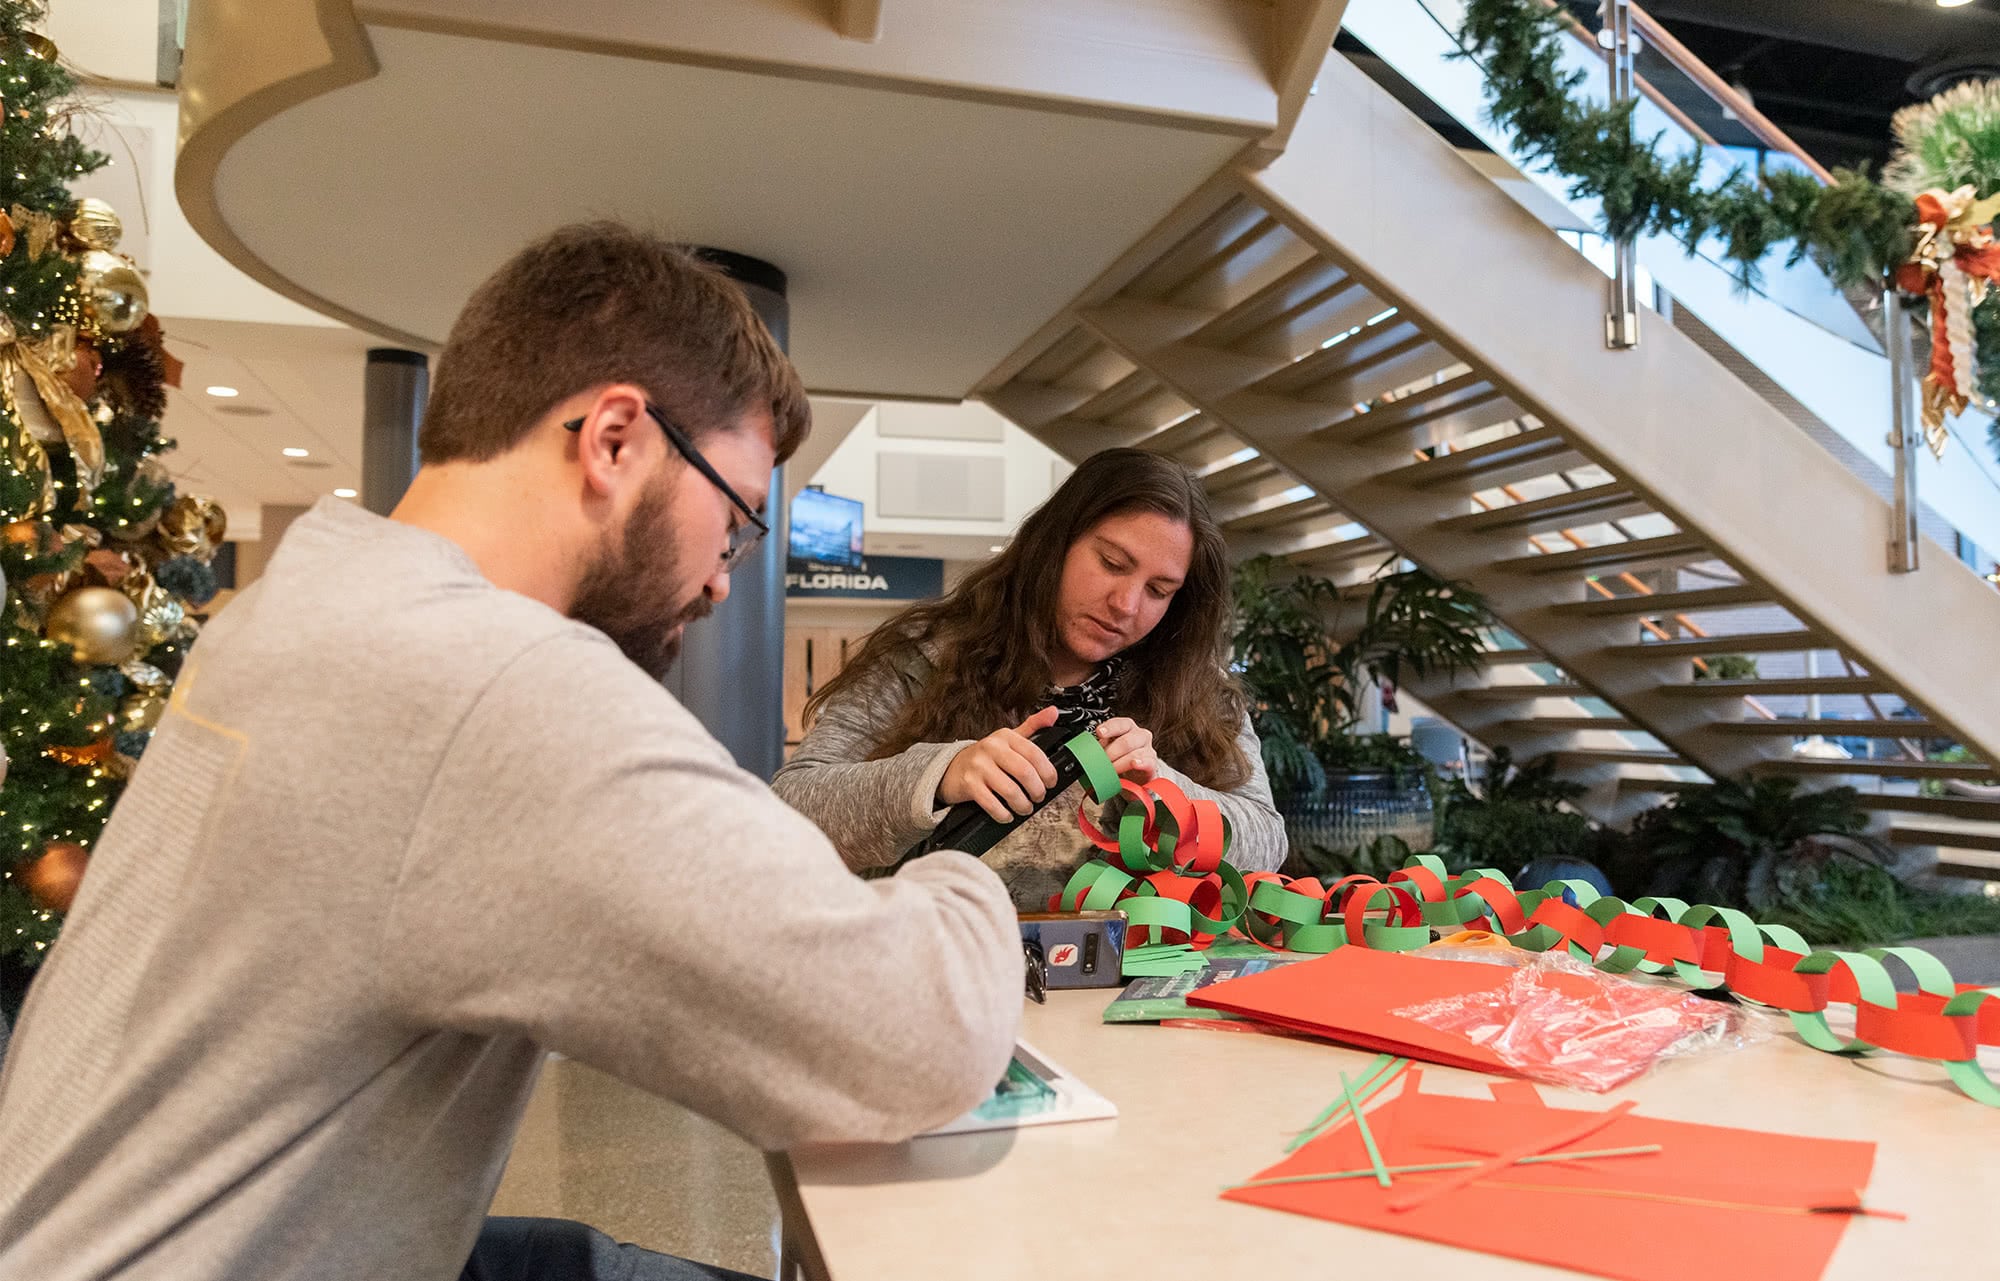 Male and Female students make a Christmas paper chain